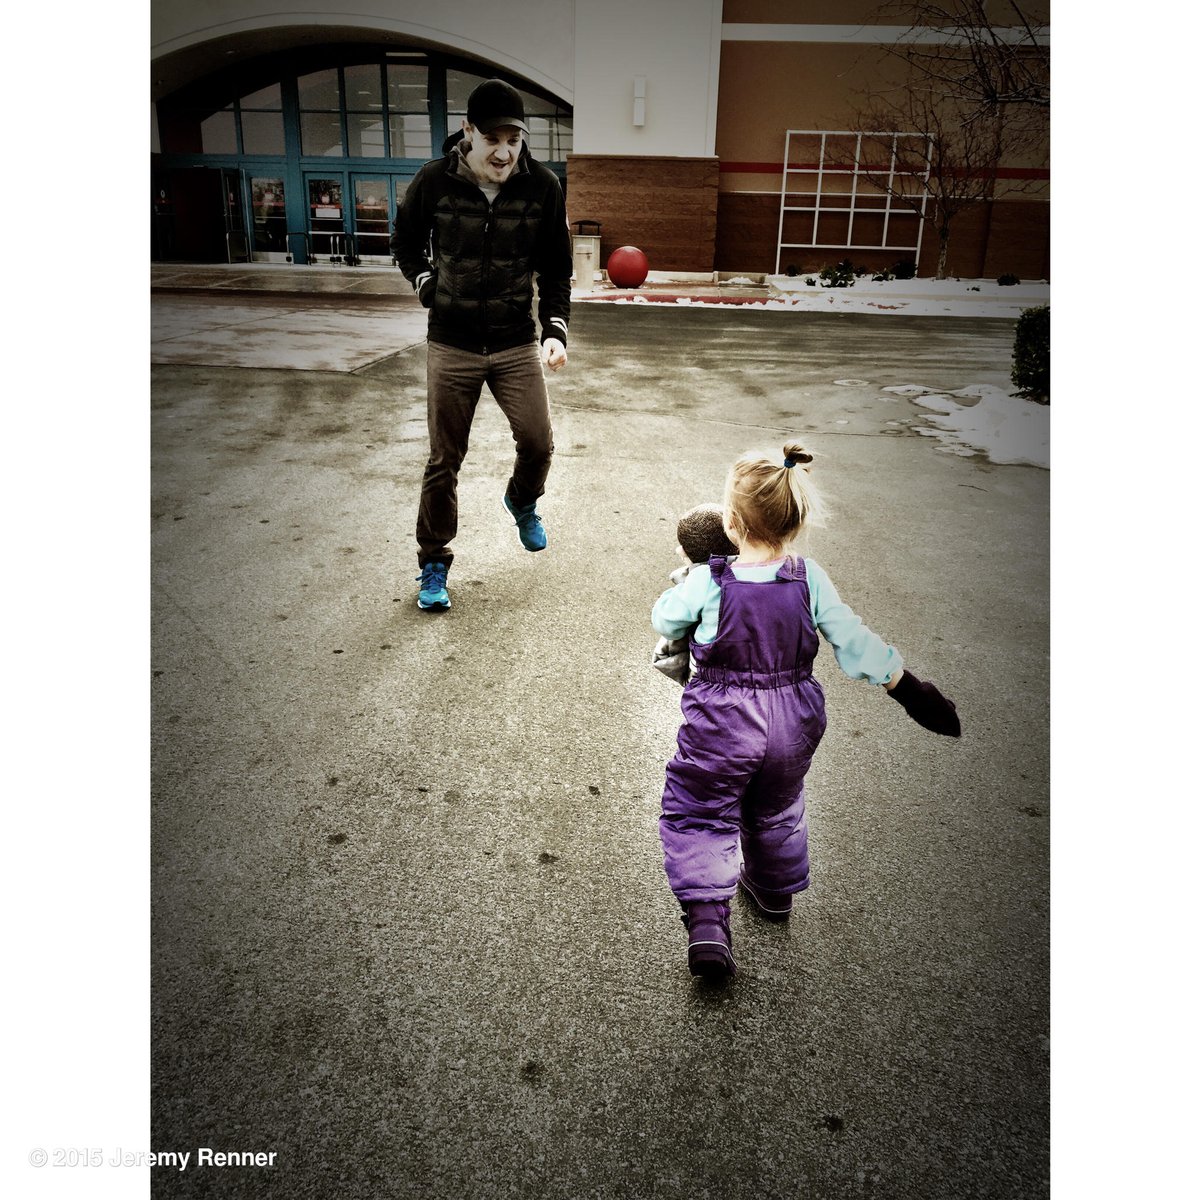 Shopping/skipping for the lady of the house #newyearsprep #errandswithdaddy https://t.co/6qc24loWkJ